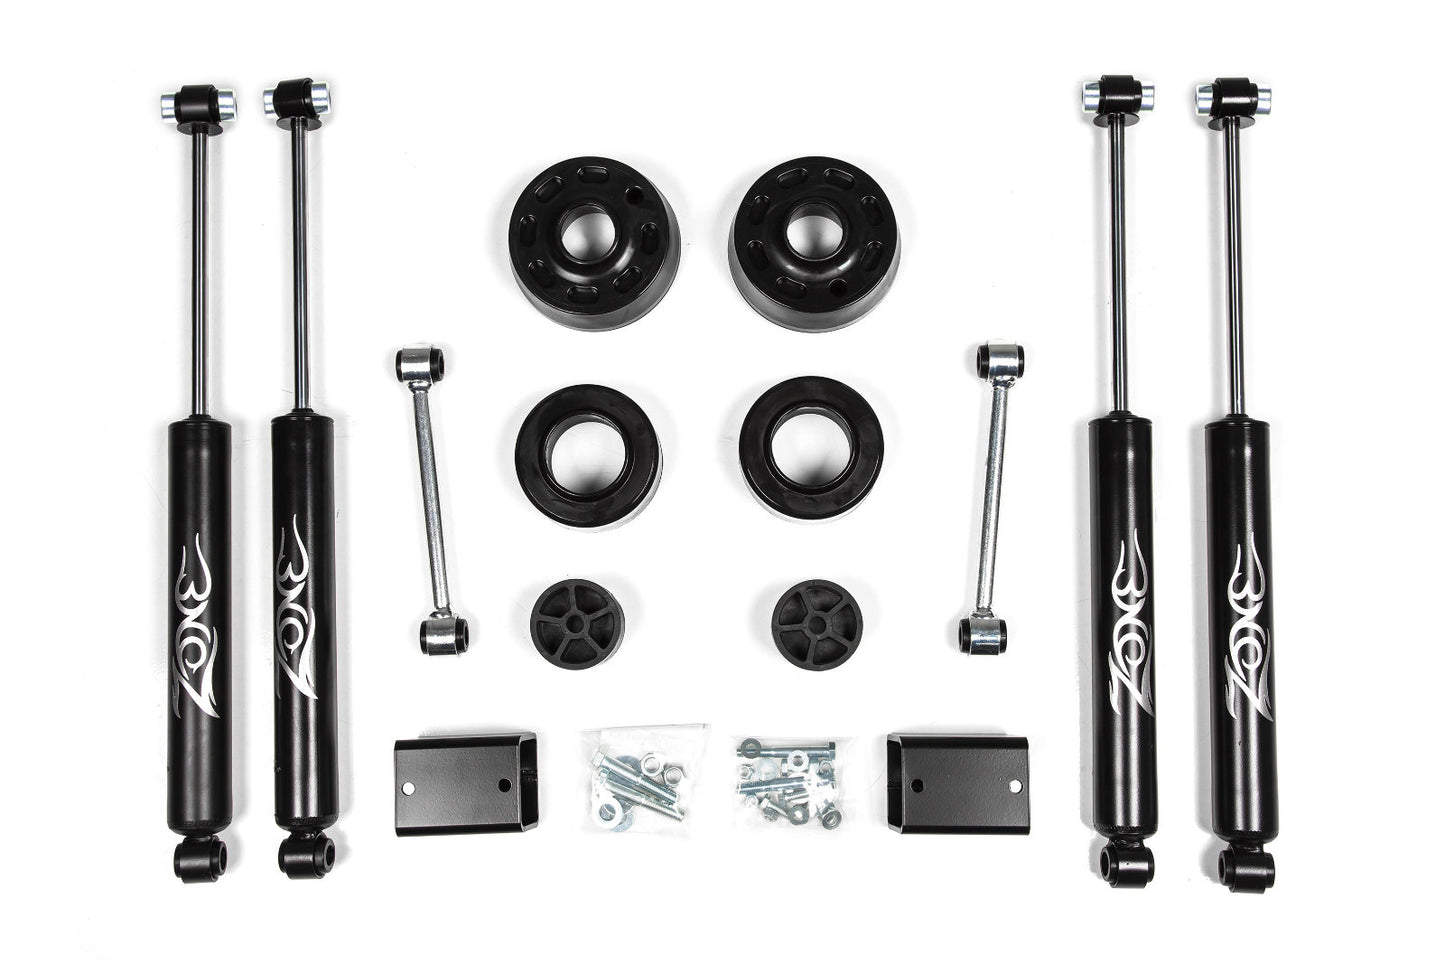 Zone Offroad 2" Suspension System for 2018 Jeep Wrangler JL